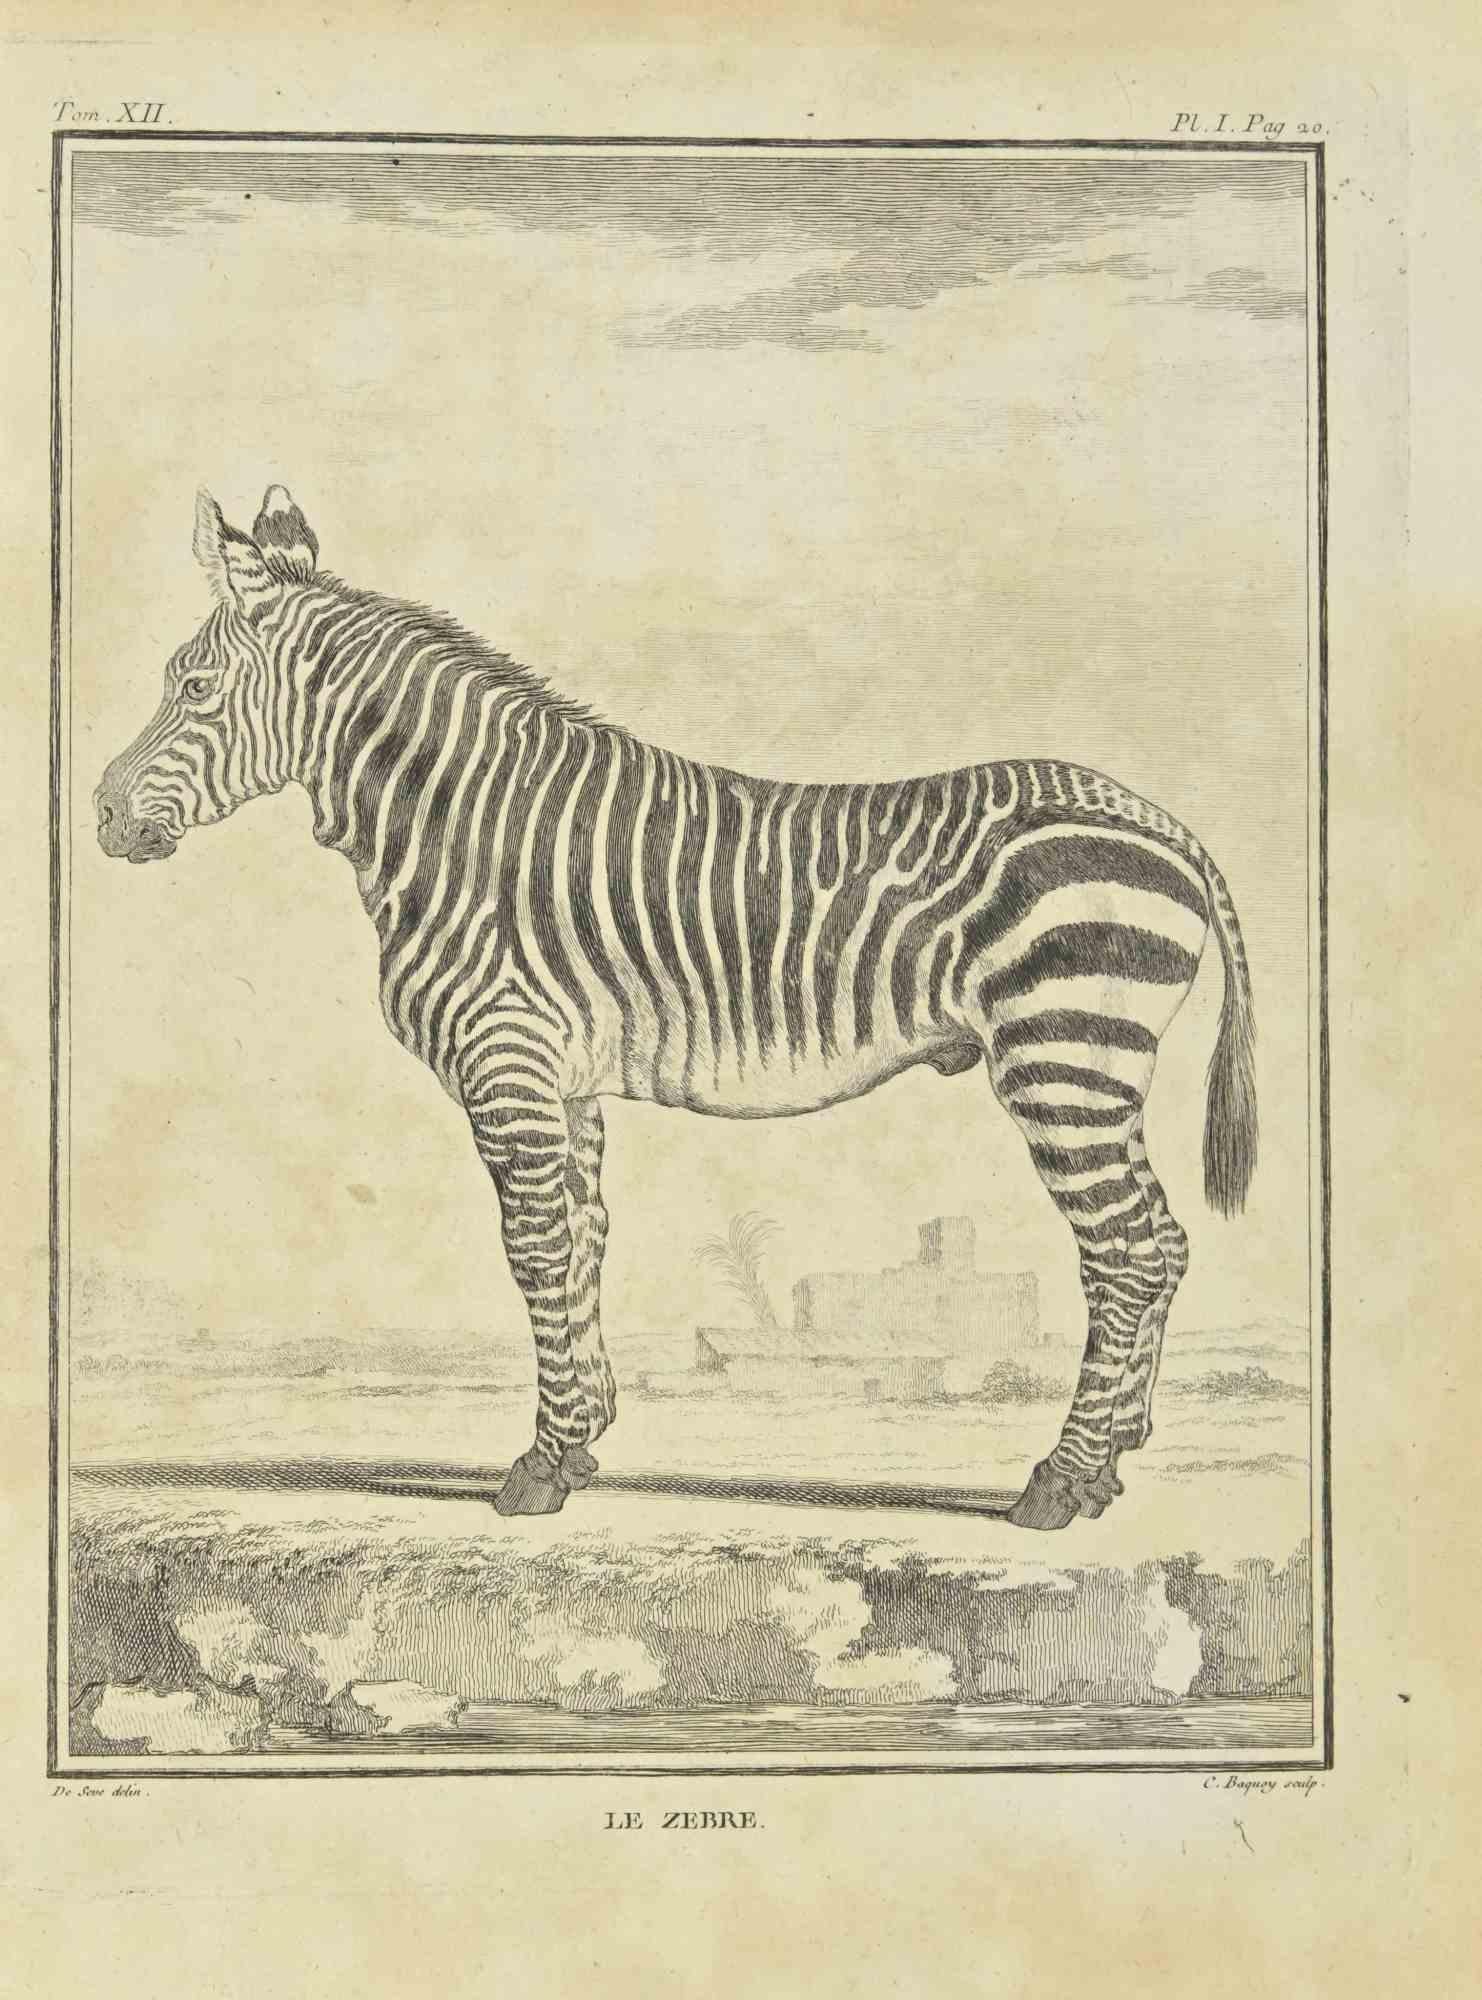 Zebra is an etching realized by Jean Charles Baquoy in 1771.

It belongs to the suite "Histoire Naturelle de Buffon".

The Artist's signature is engraved lower right.

Good conditions with slight foxing.